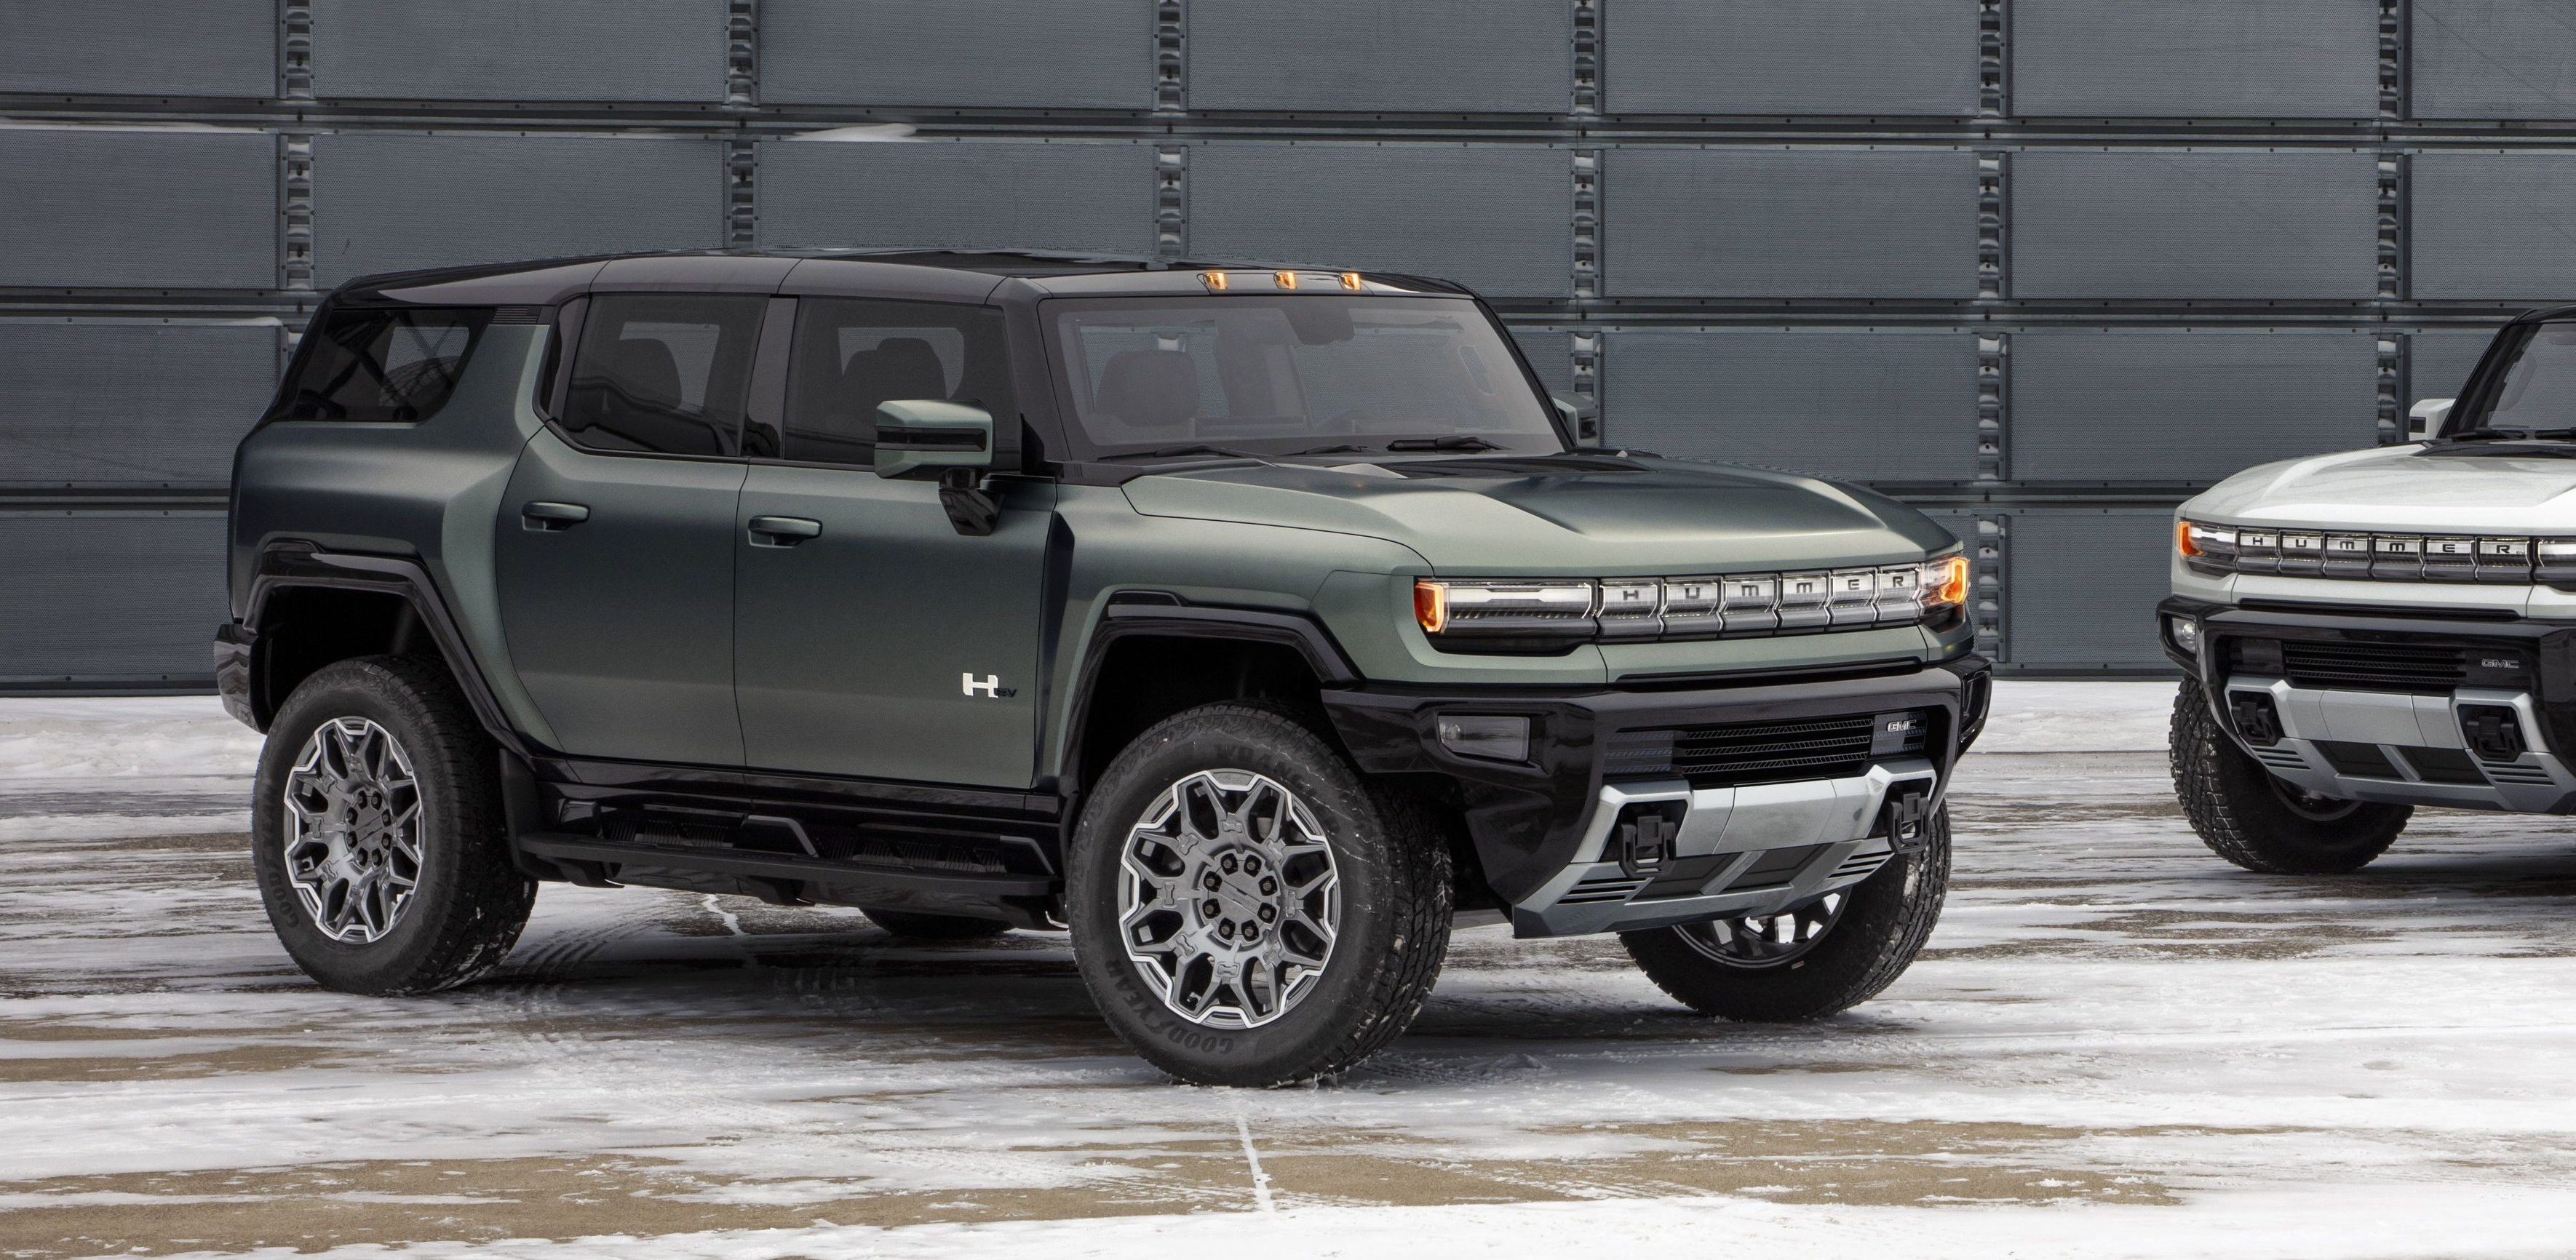 gm-unveils-hummer-ev-suv-version-starting-at-80-000-but-it-is-going